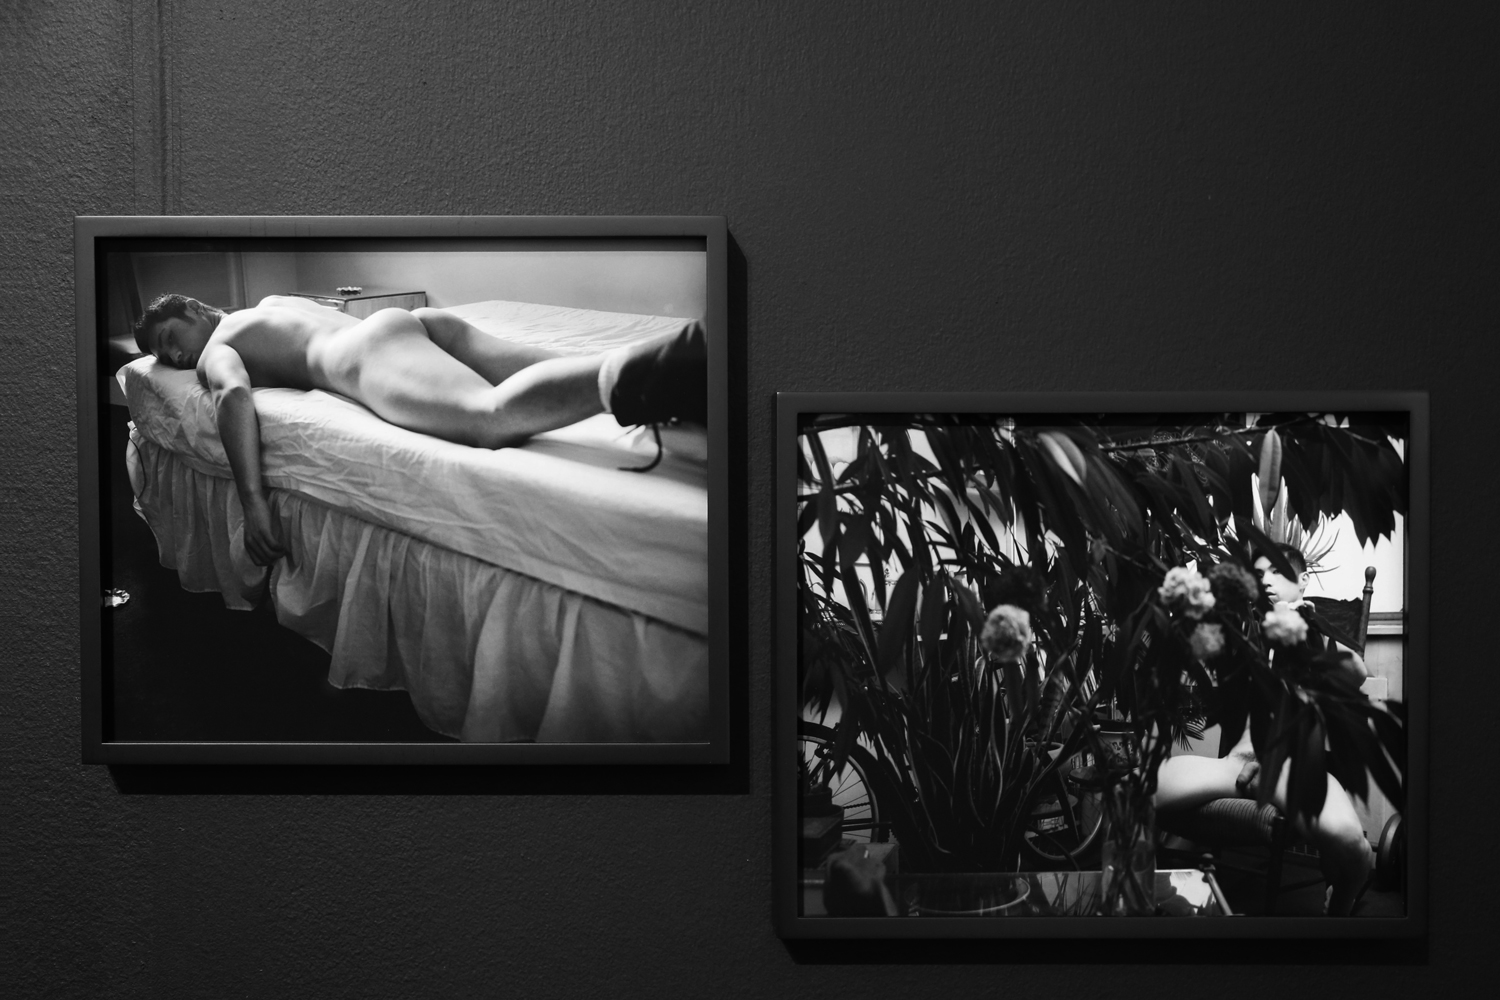 In an earlier series, Wei turns the camera on himself. Glance (left) and Flowers (right), 2004, Shen Wei, Flowers Gallery, London & New York. Image by the author. Image by the author.